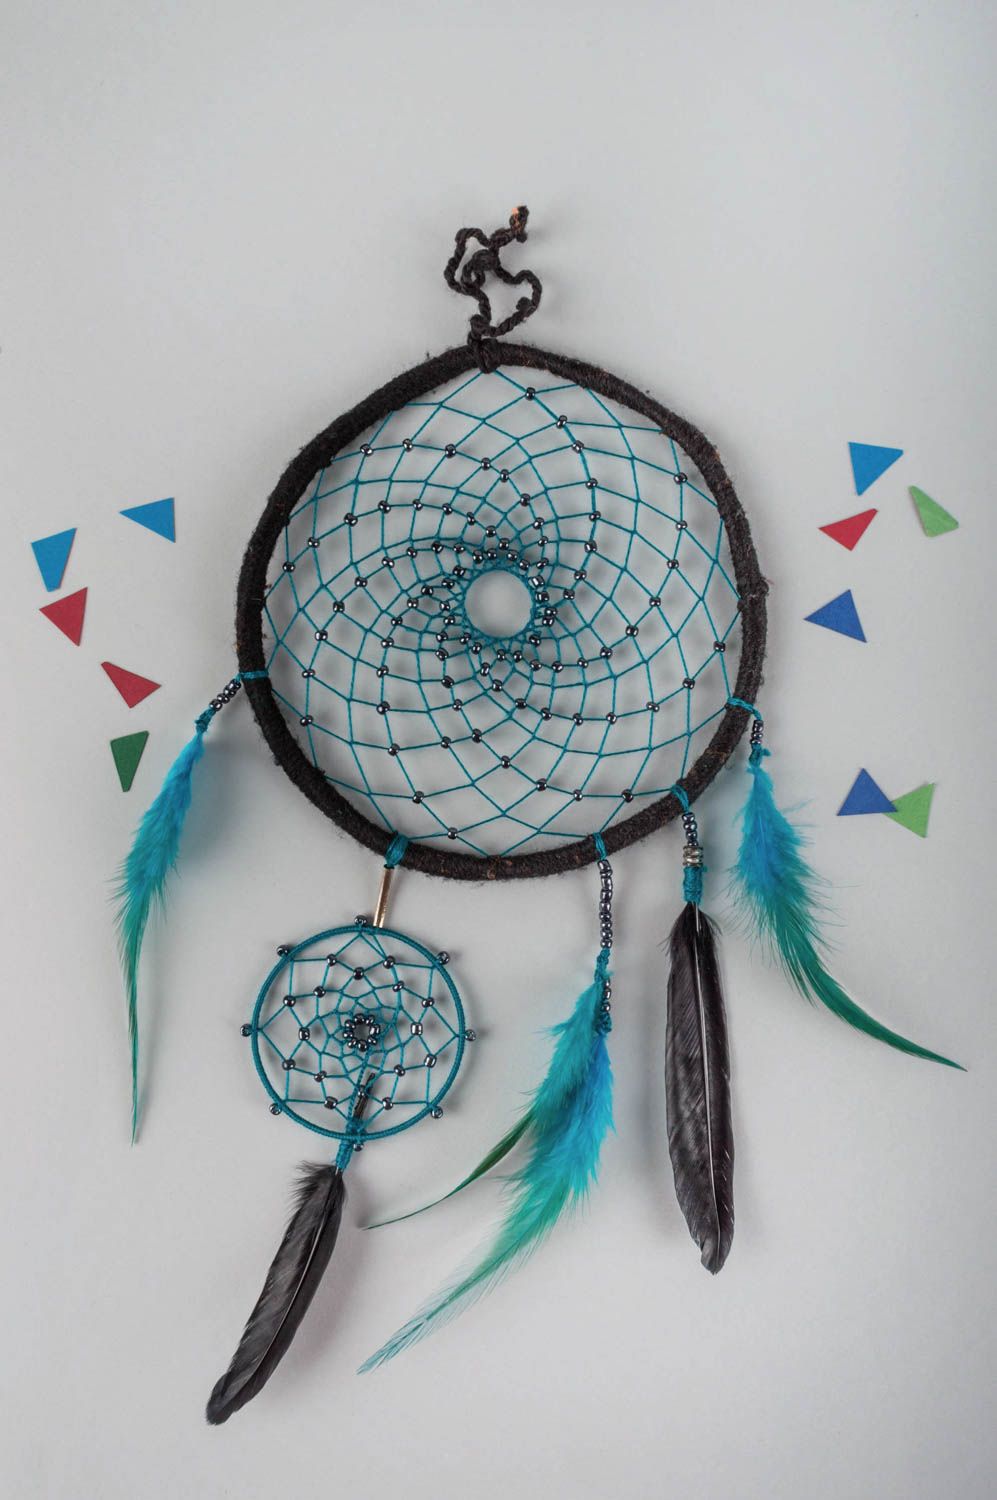 Unusual handmade Indian dreamcatcher amulet home charm cool bedrooms gift ideas photo 1